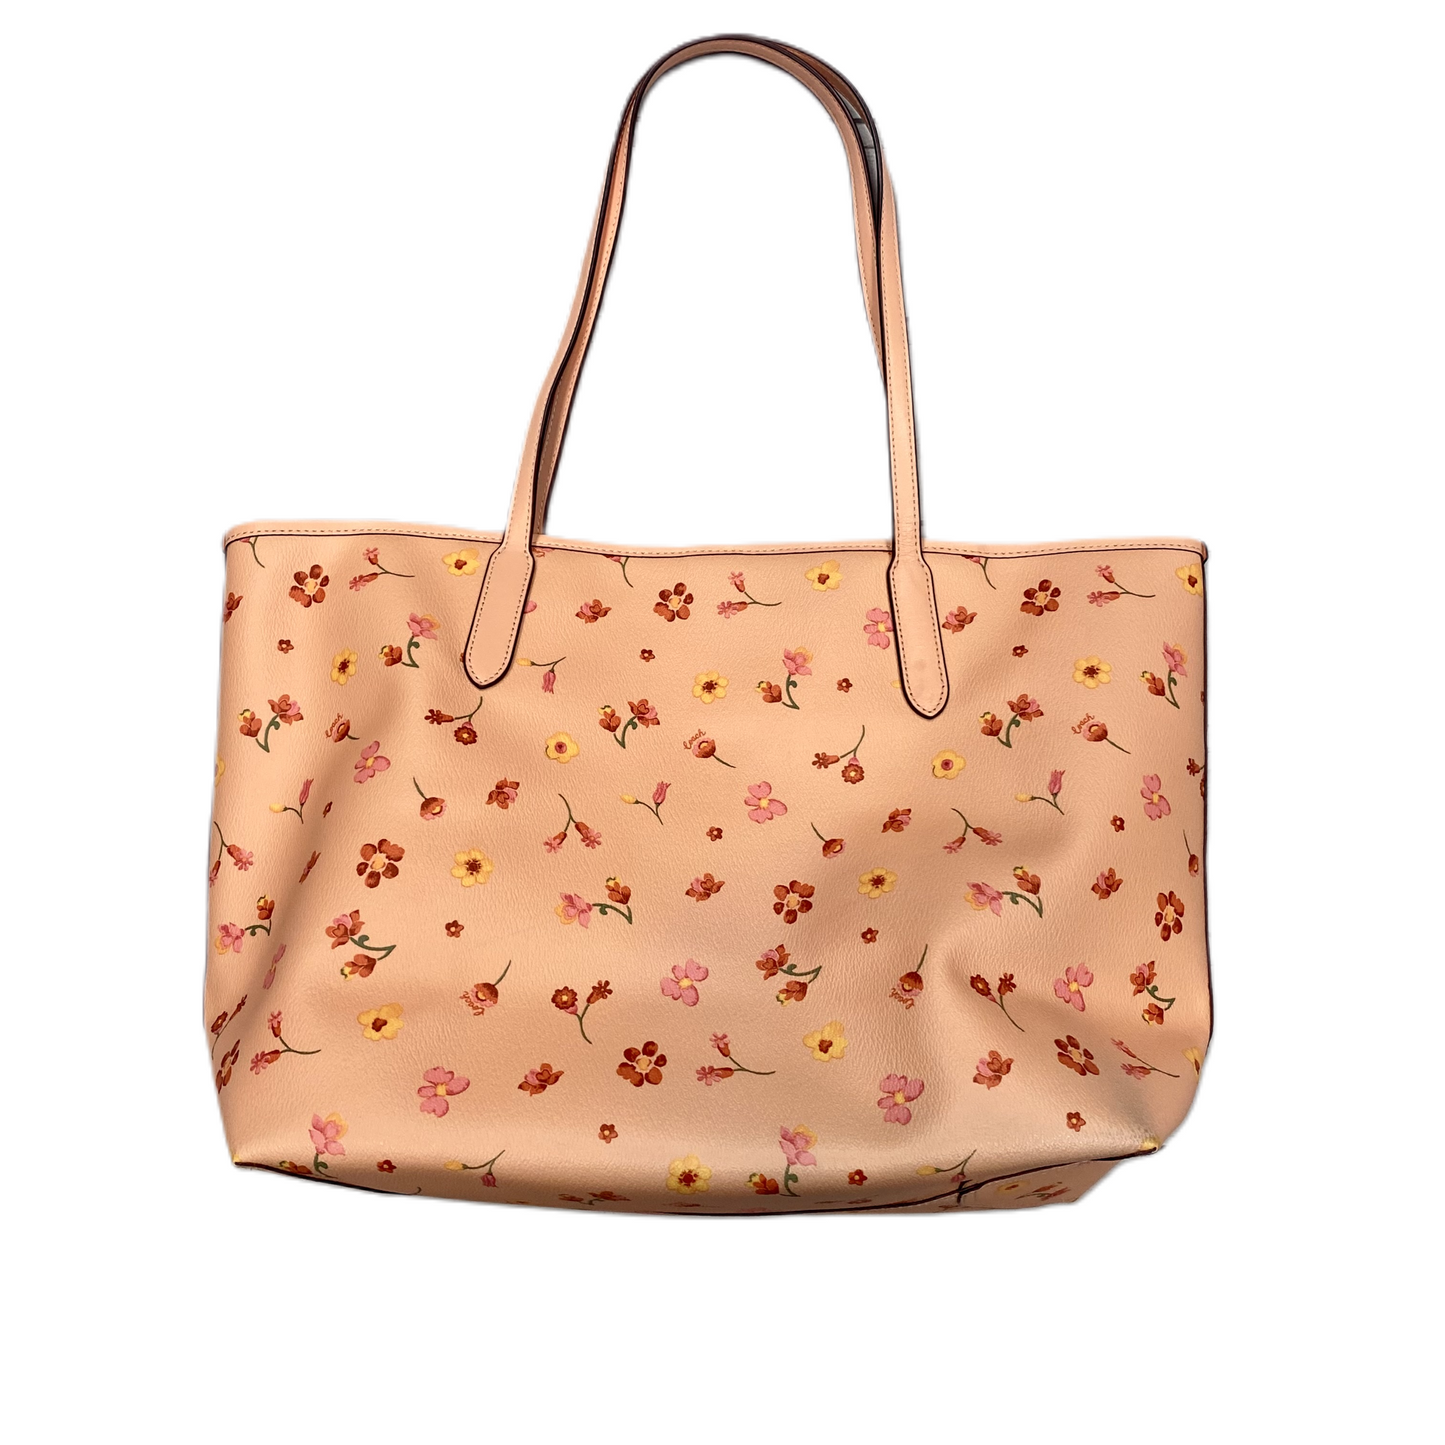 Tote Designer By Coach, Size: Large